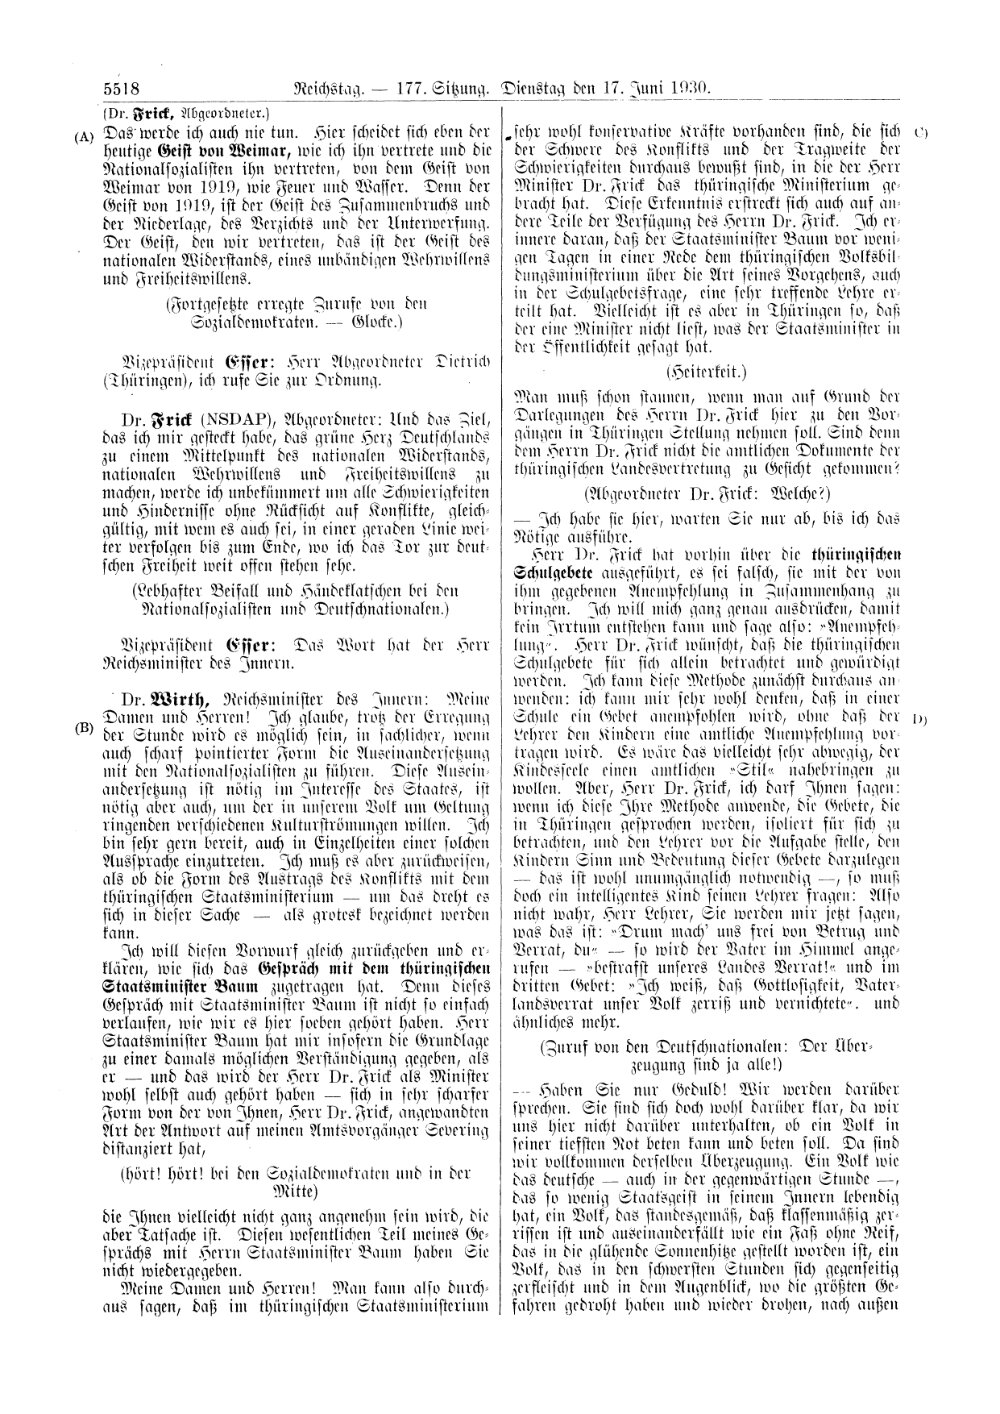 Scan of page 5518